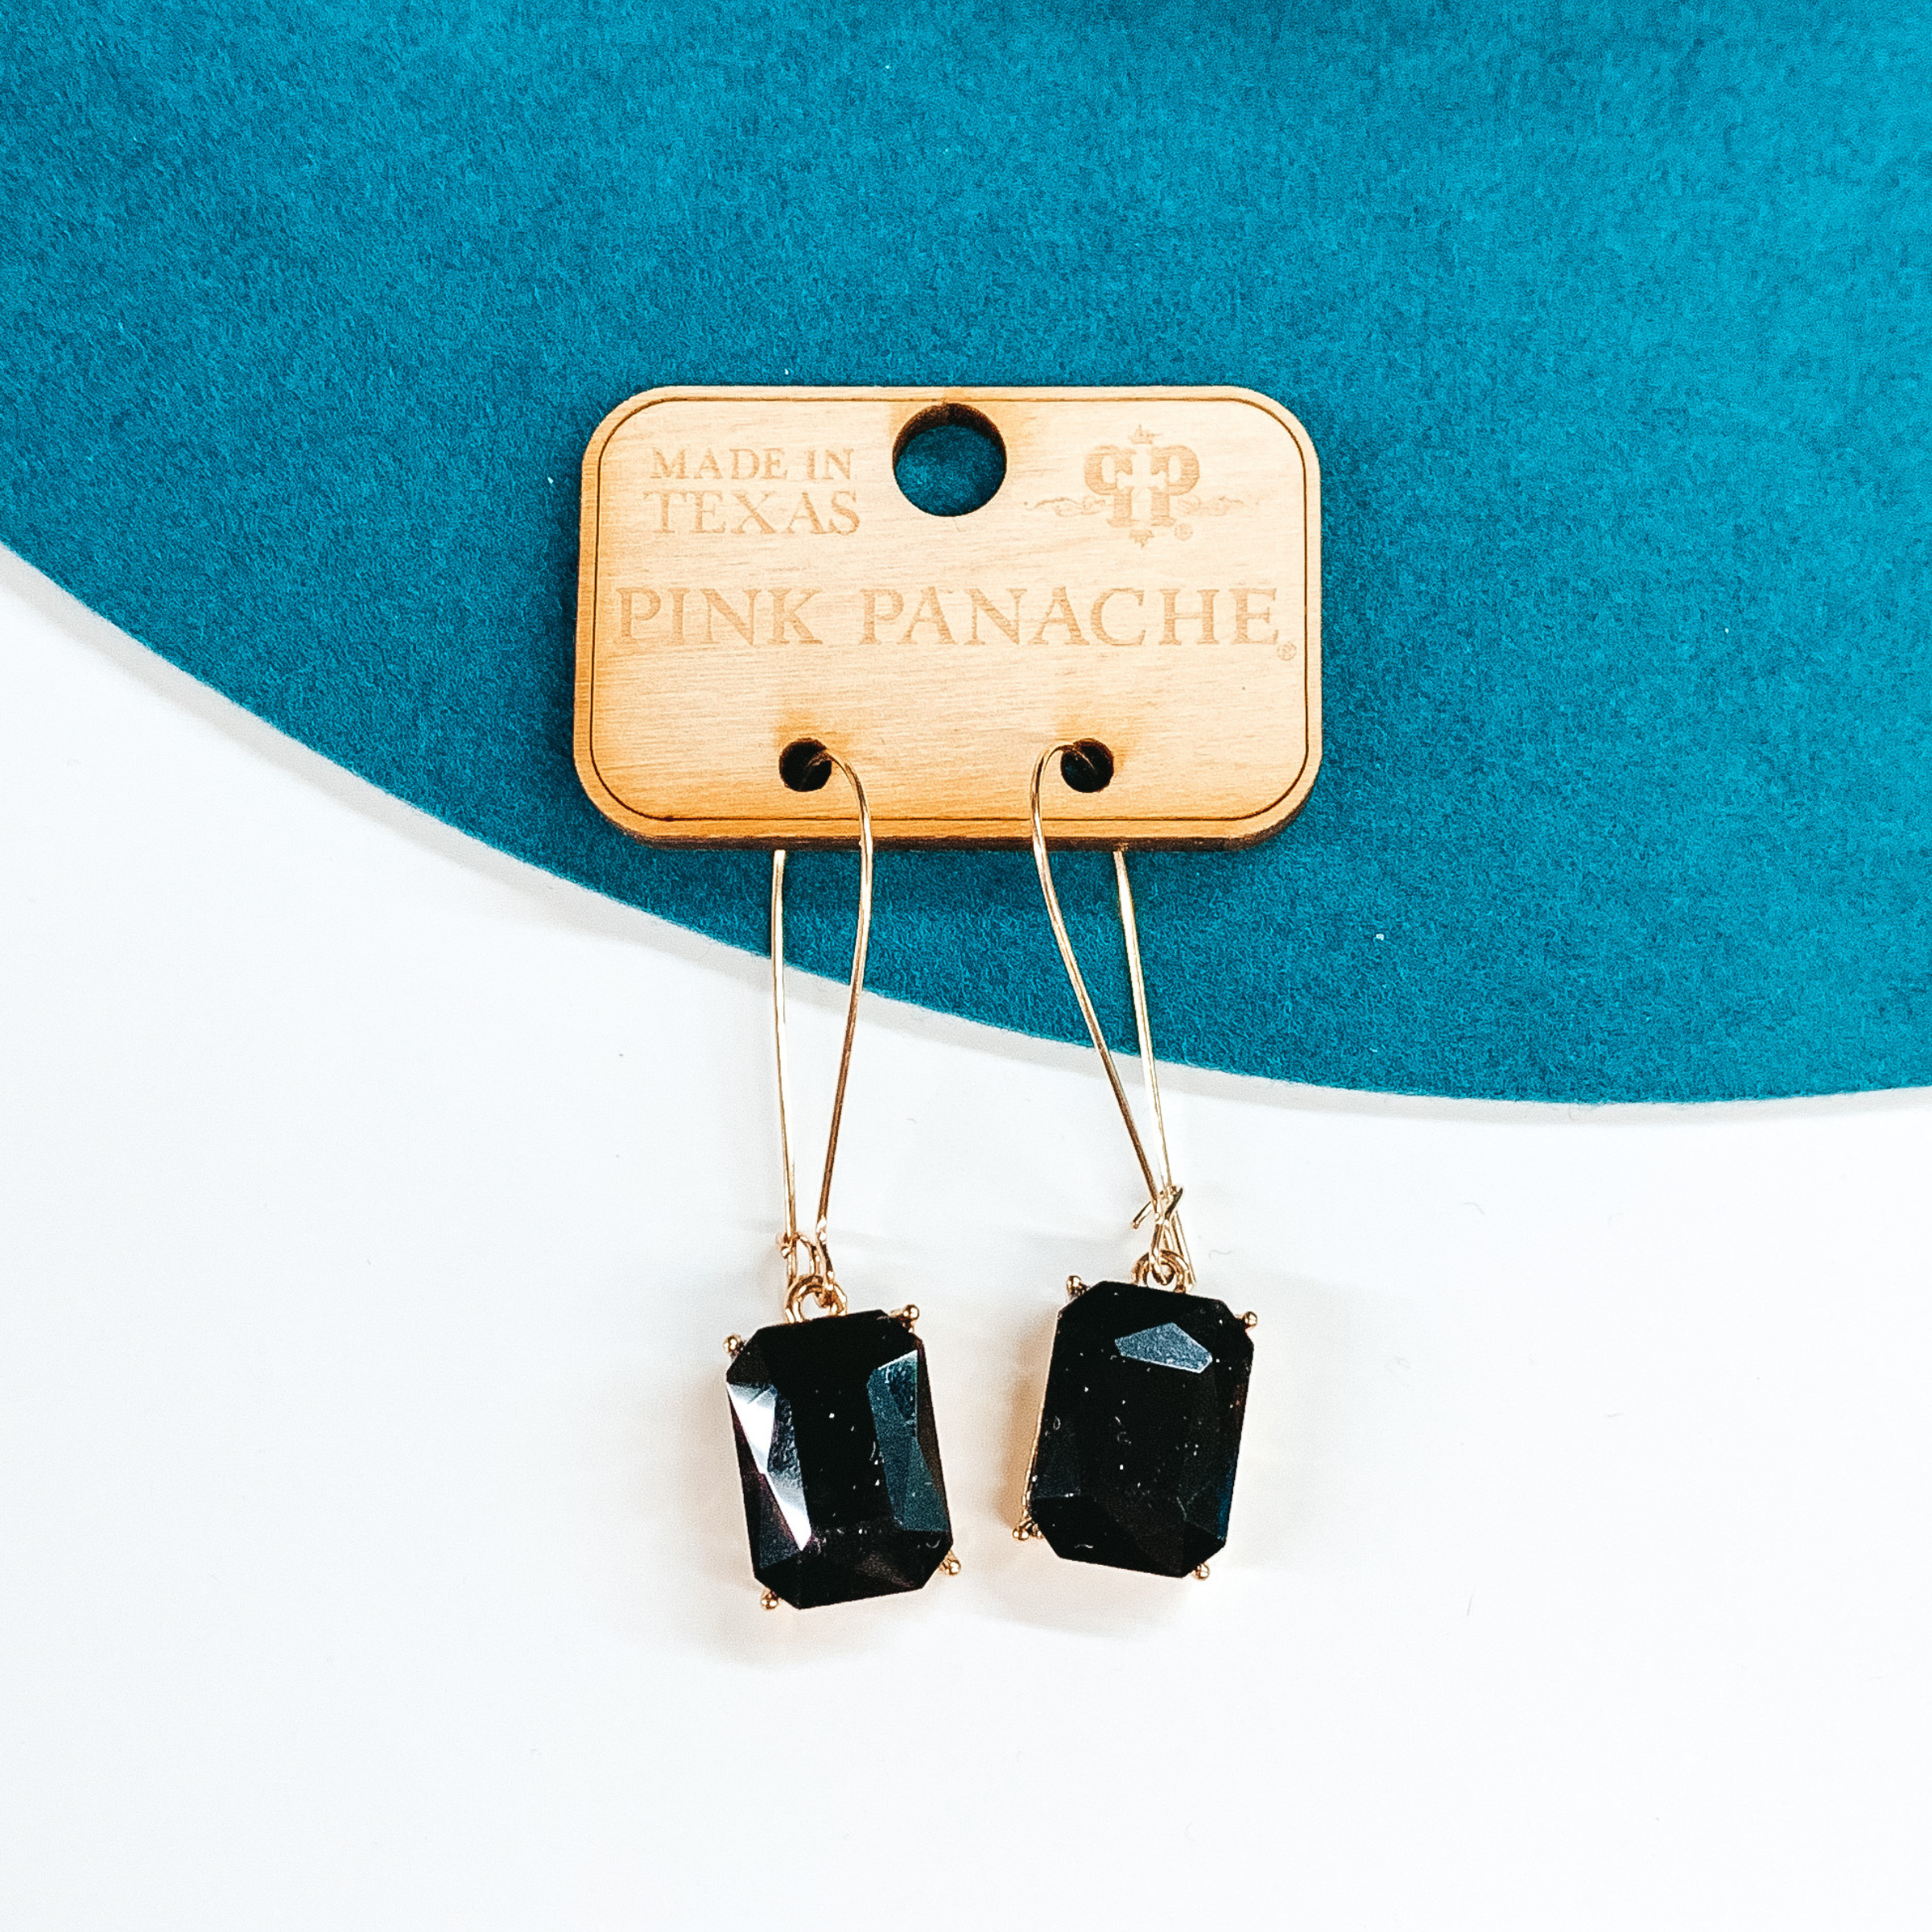 Gold kidney wire earrings with a hanging rectangle black crystal pendant. These earrings are pictured on a teal and white background. 